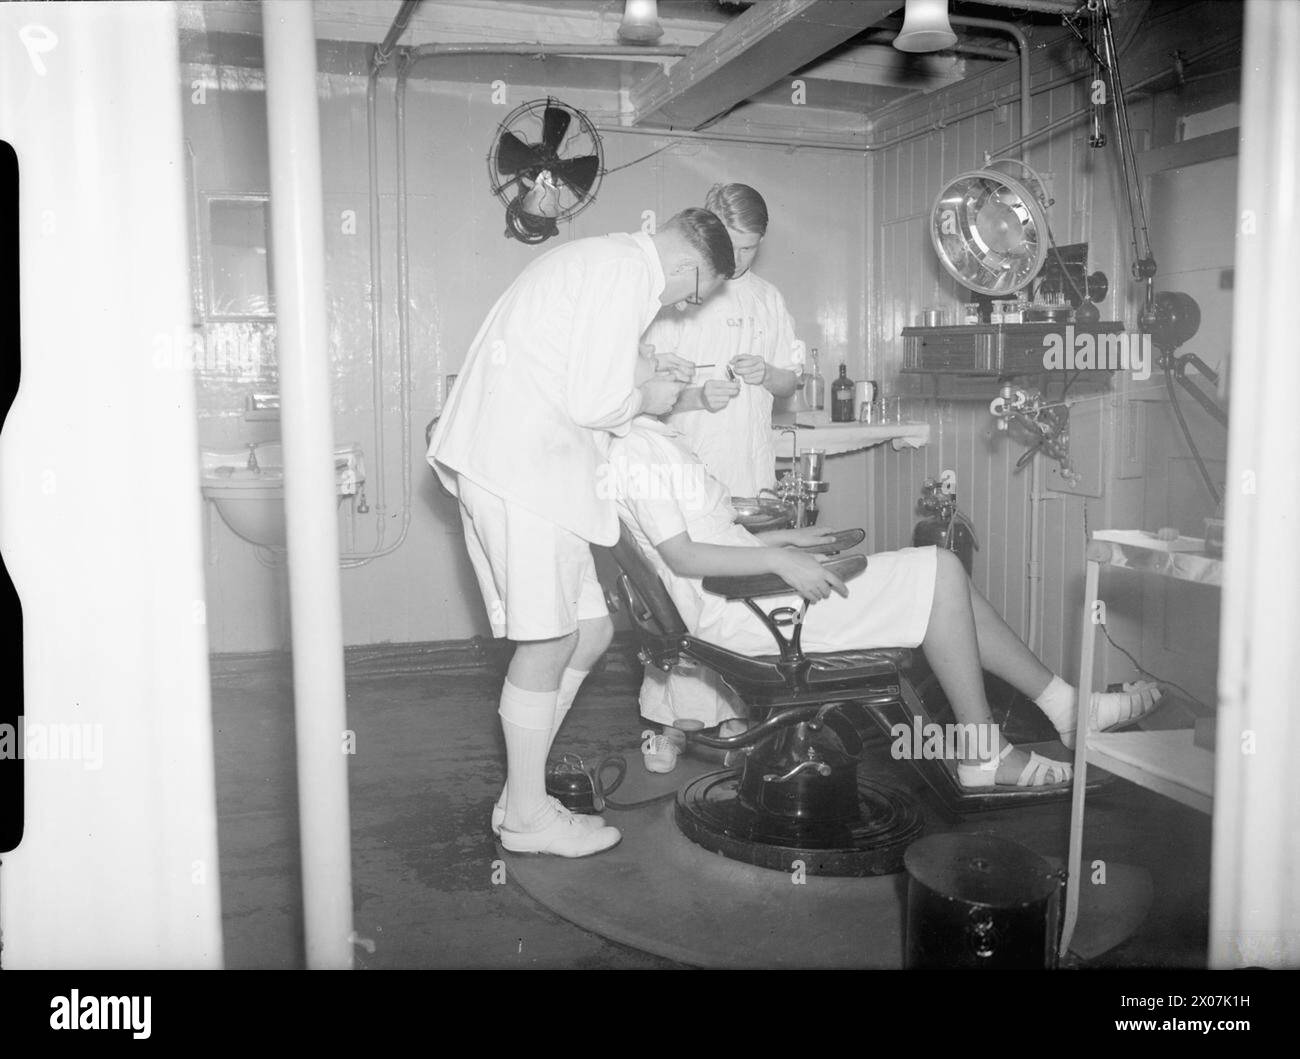 THE ROYAL NAVY DURING THE SECOND WORLD WAR - On board the hospital ship HMHS MAINE, Lake Timsah, Ismalia, Suez canal. Here a Wren is receiving treatment in the dental surgery  Royal Fleet Auxiliary, RFA Maine, Hospital Ship, (1887), Royal Navy, Women's Royal Naval Service Stock Photo